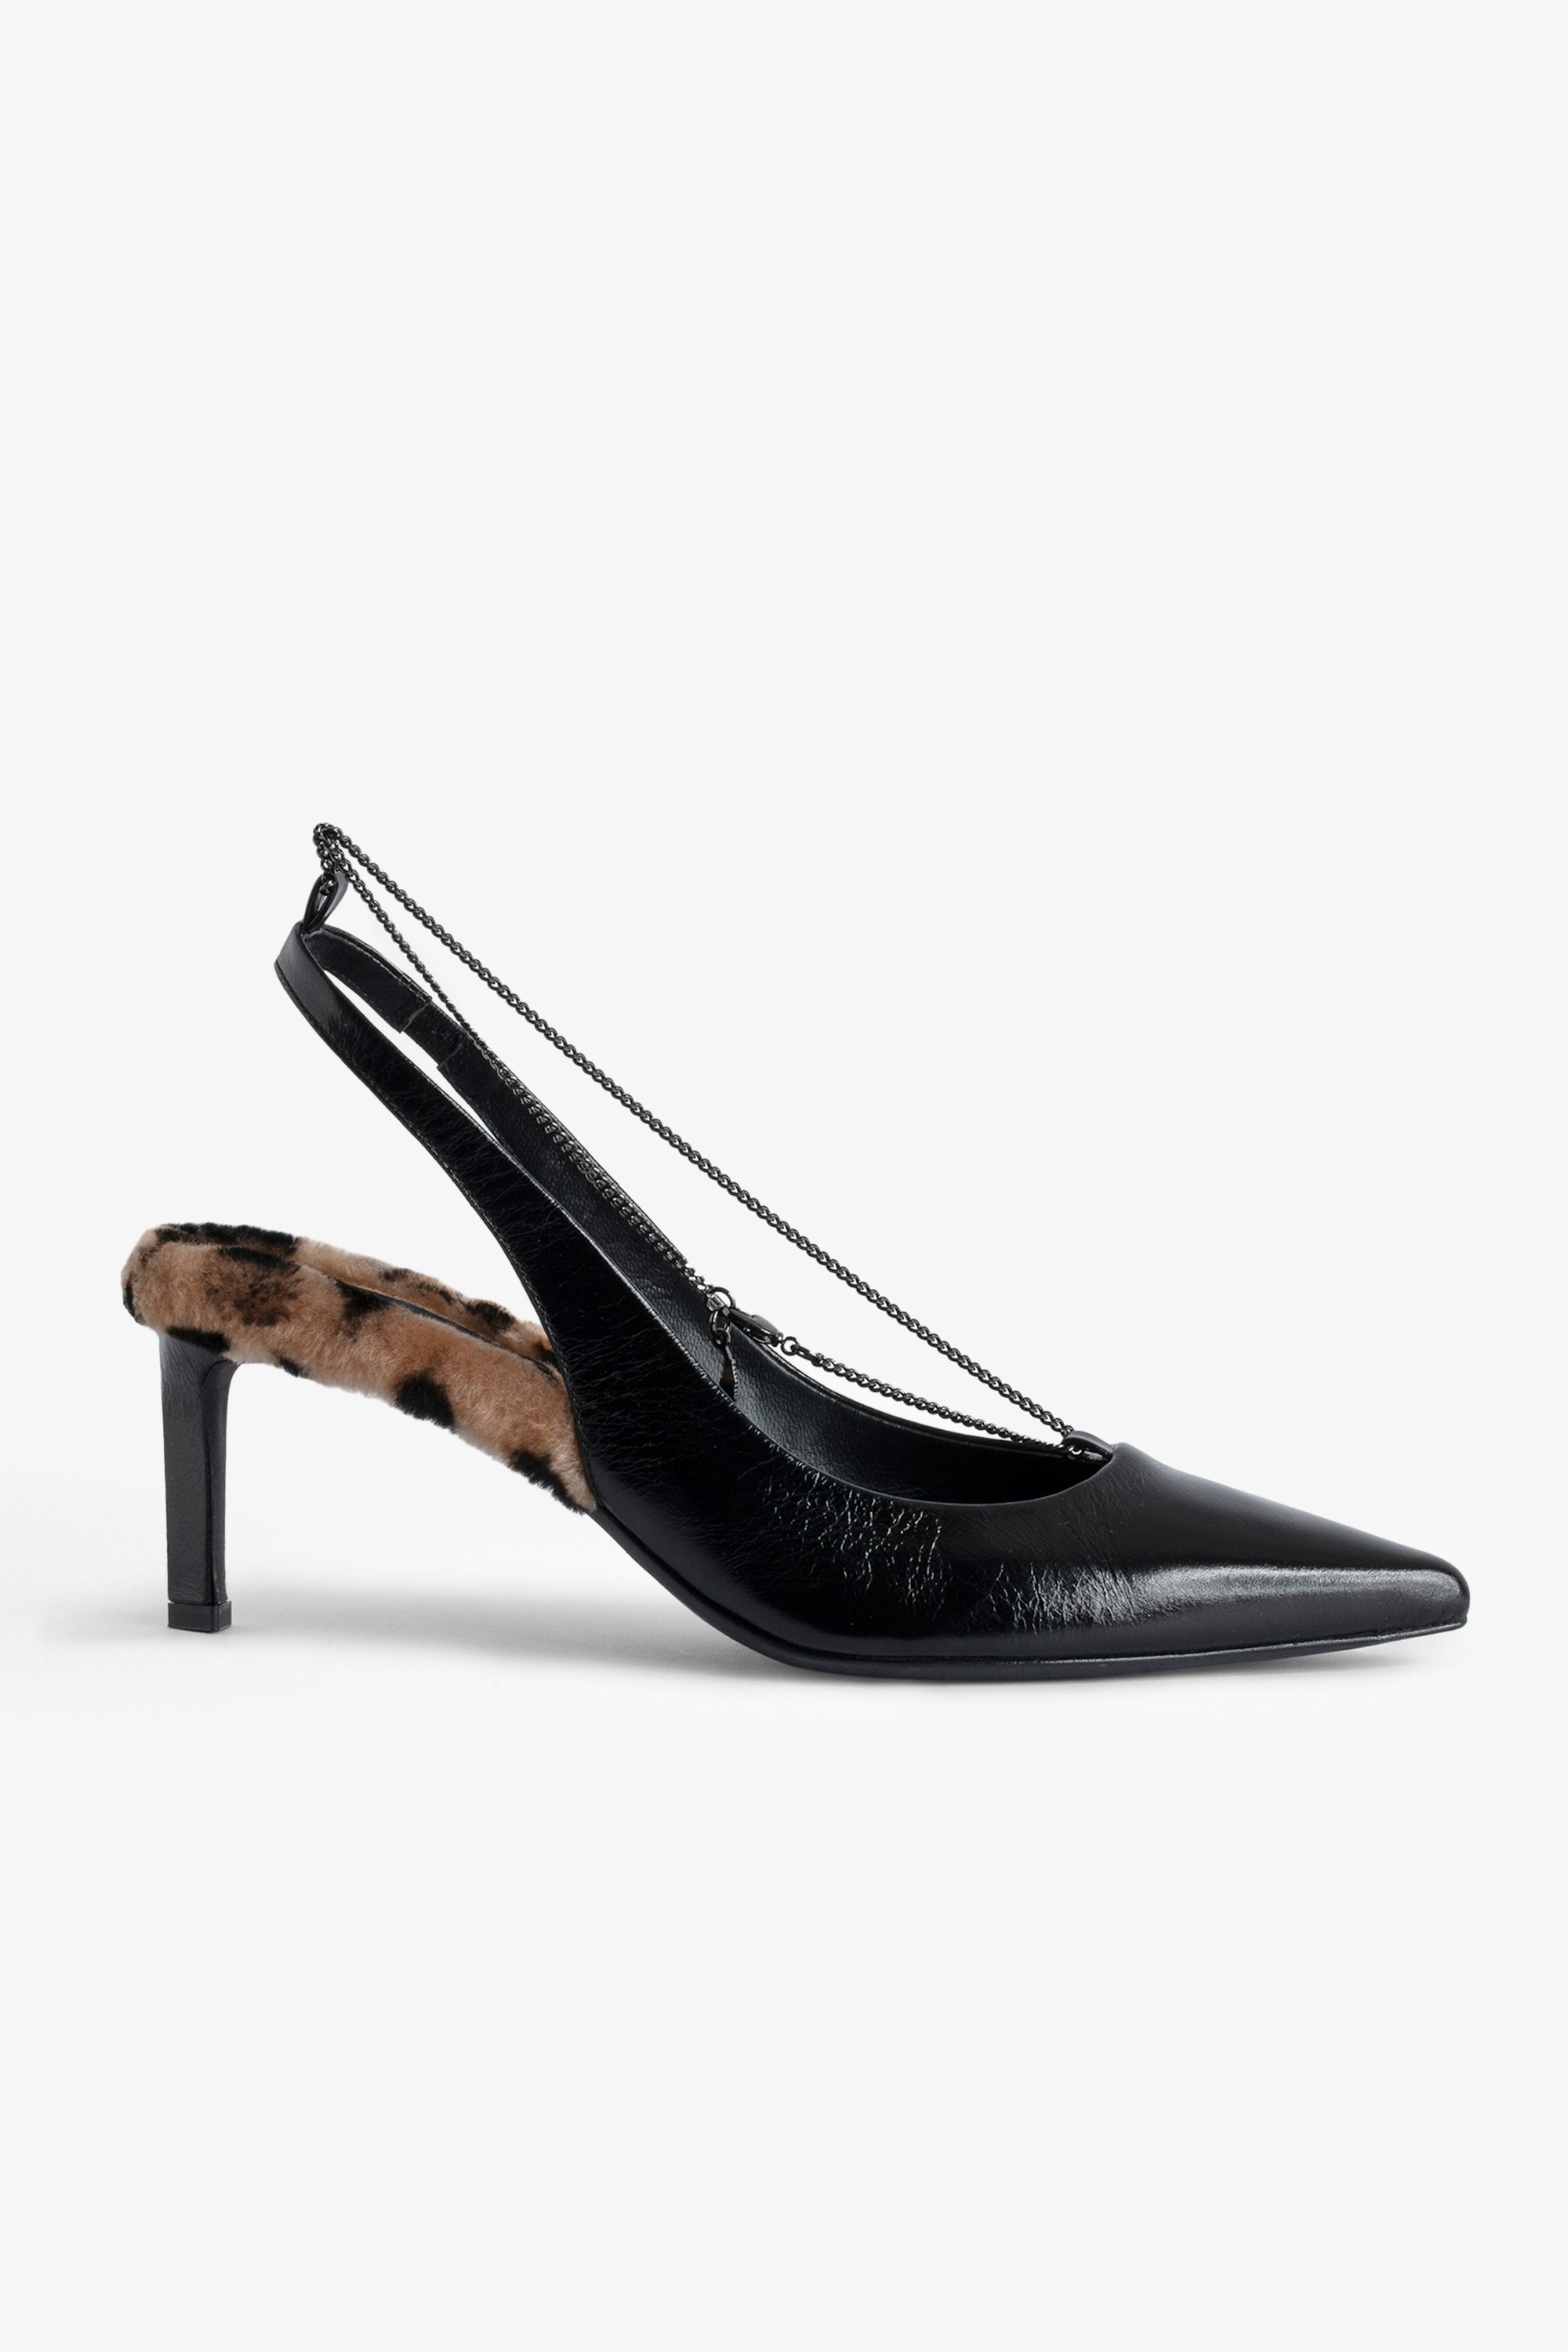 First Night Court Shoes Women’s black vintage-style leather court shoes with leopard shearling trim and chain.